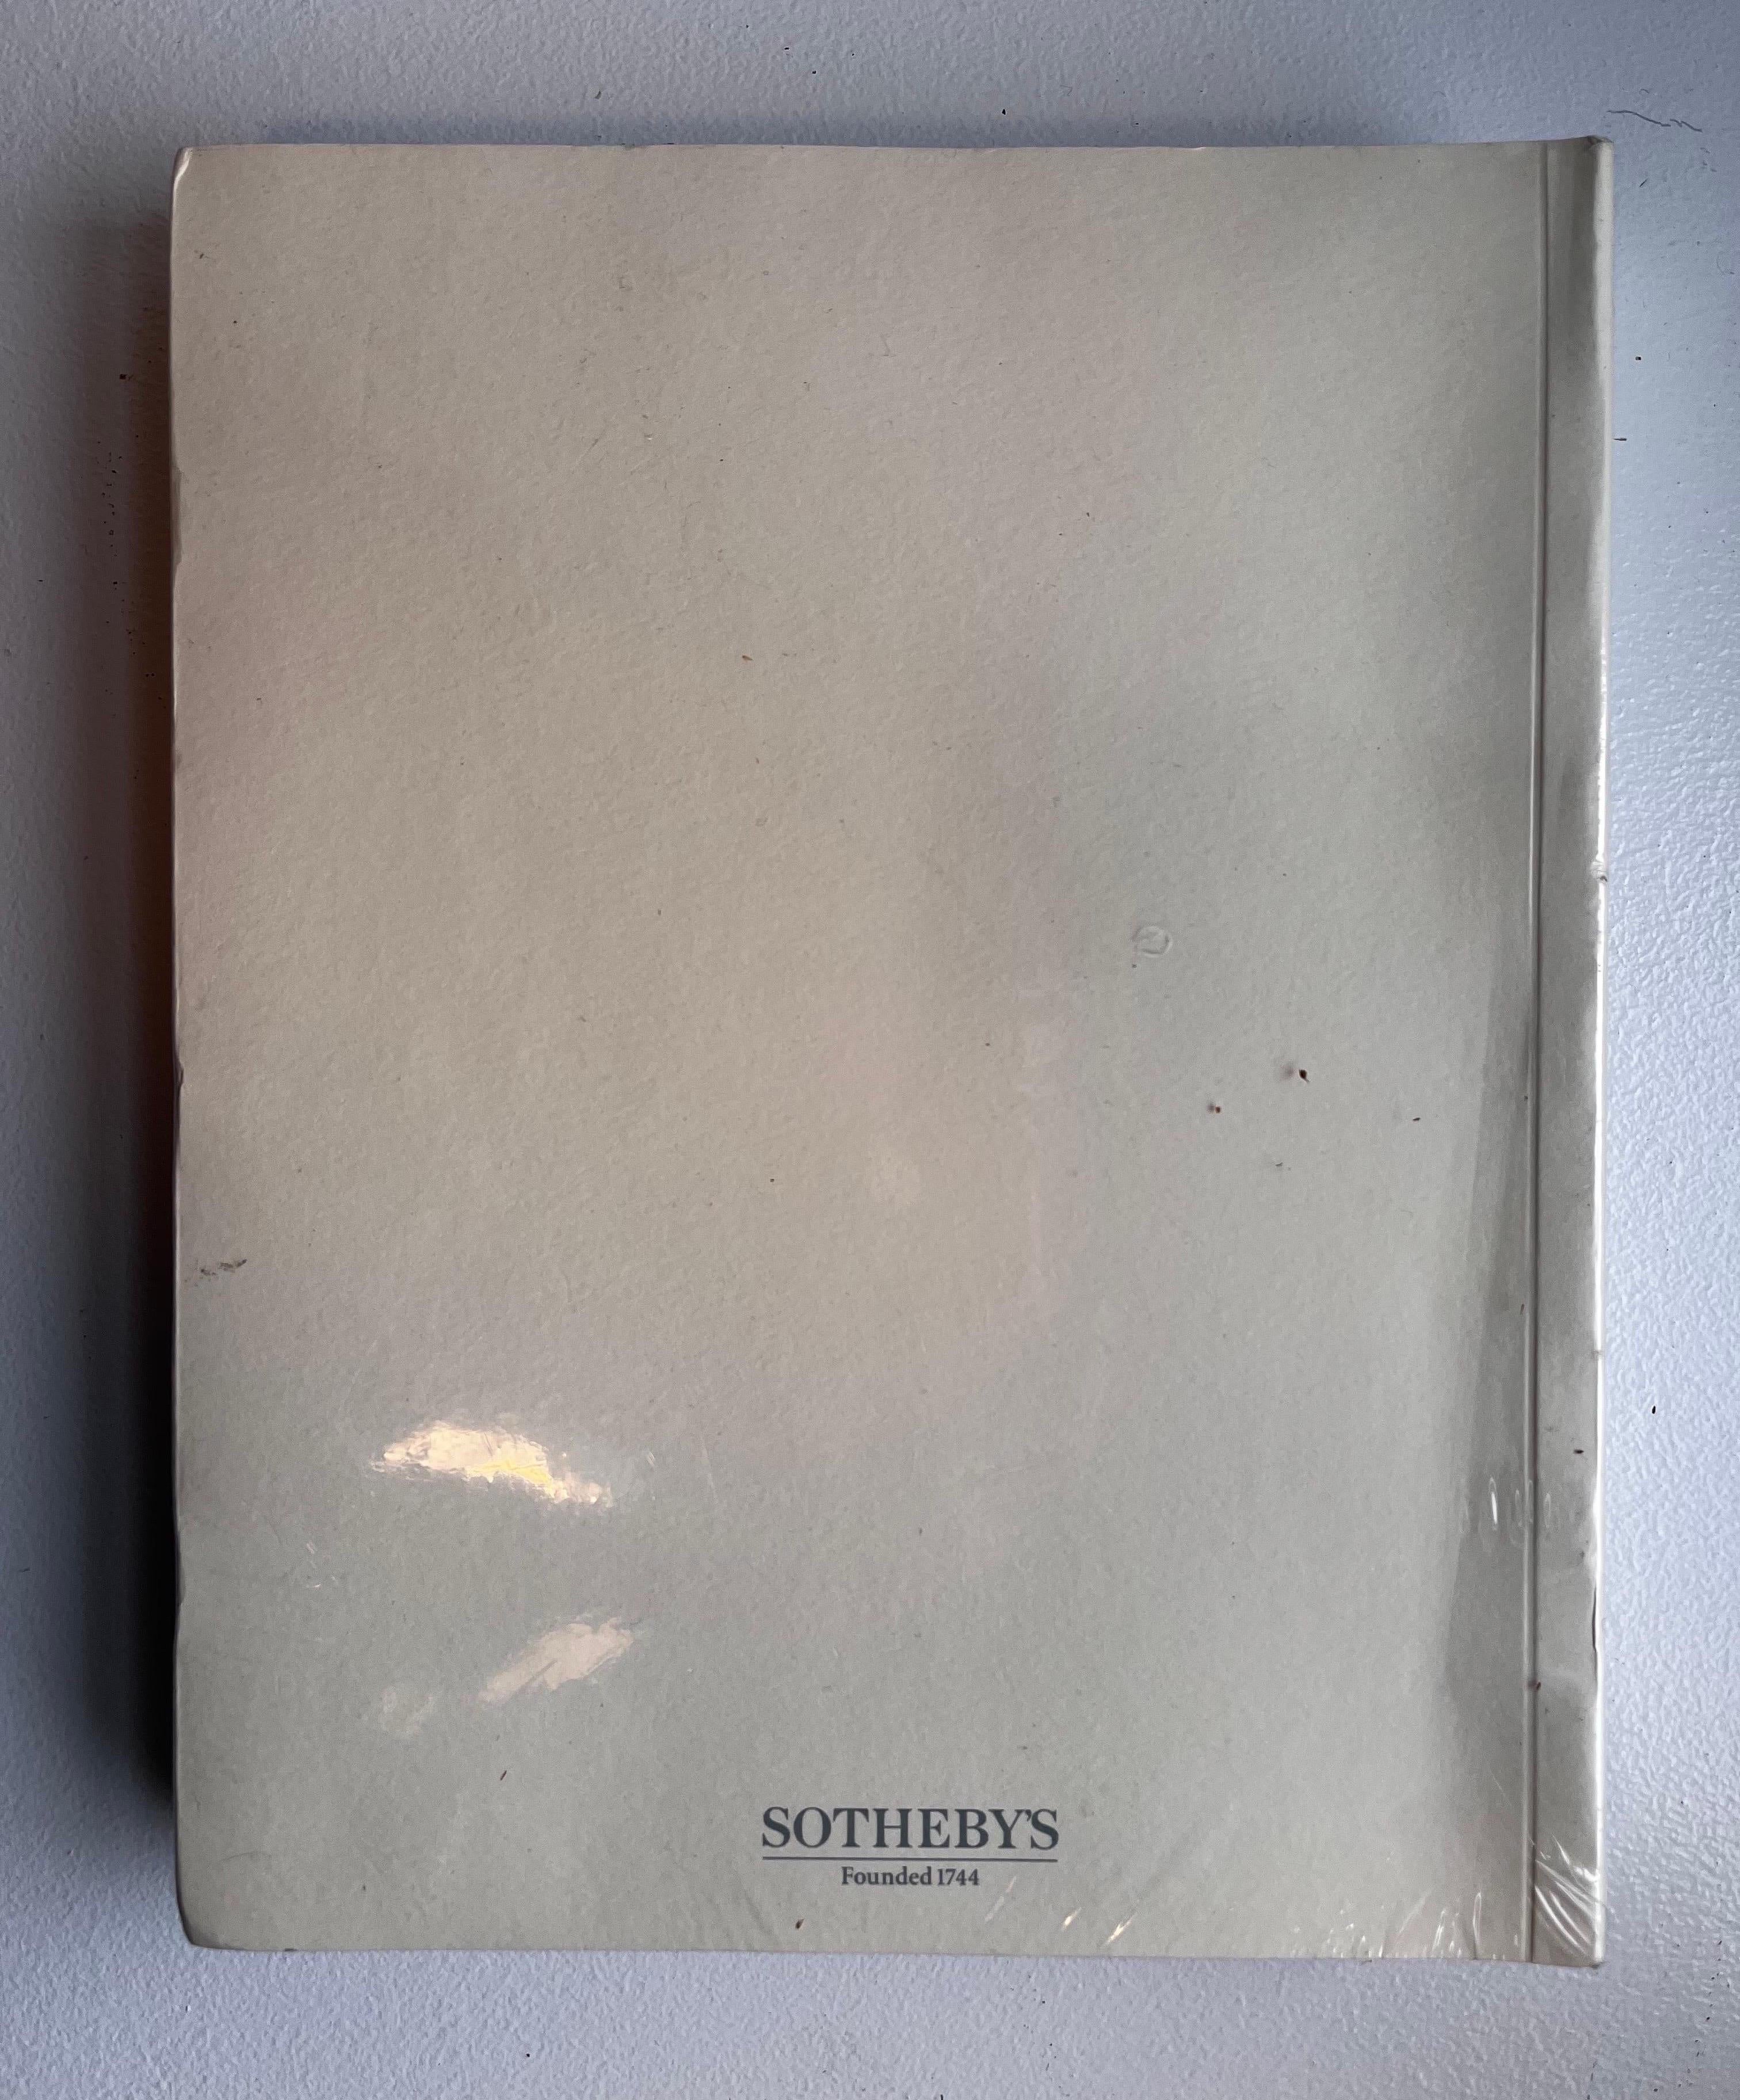 Modern Jacqueline Kennedy Onassis, Sotheby's Auction Catalogue, New in Wrapper